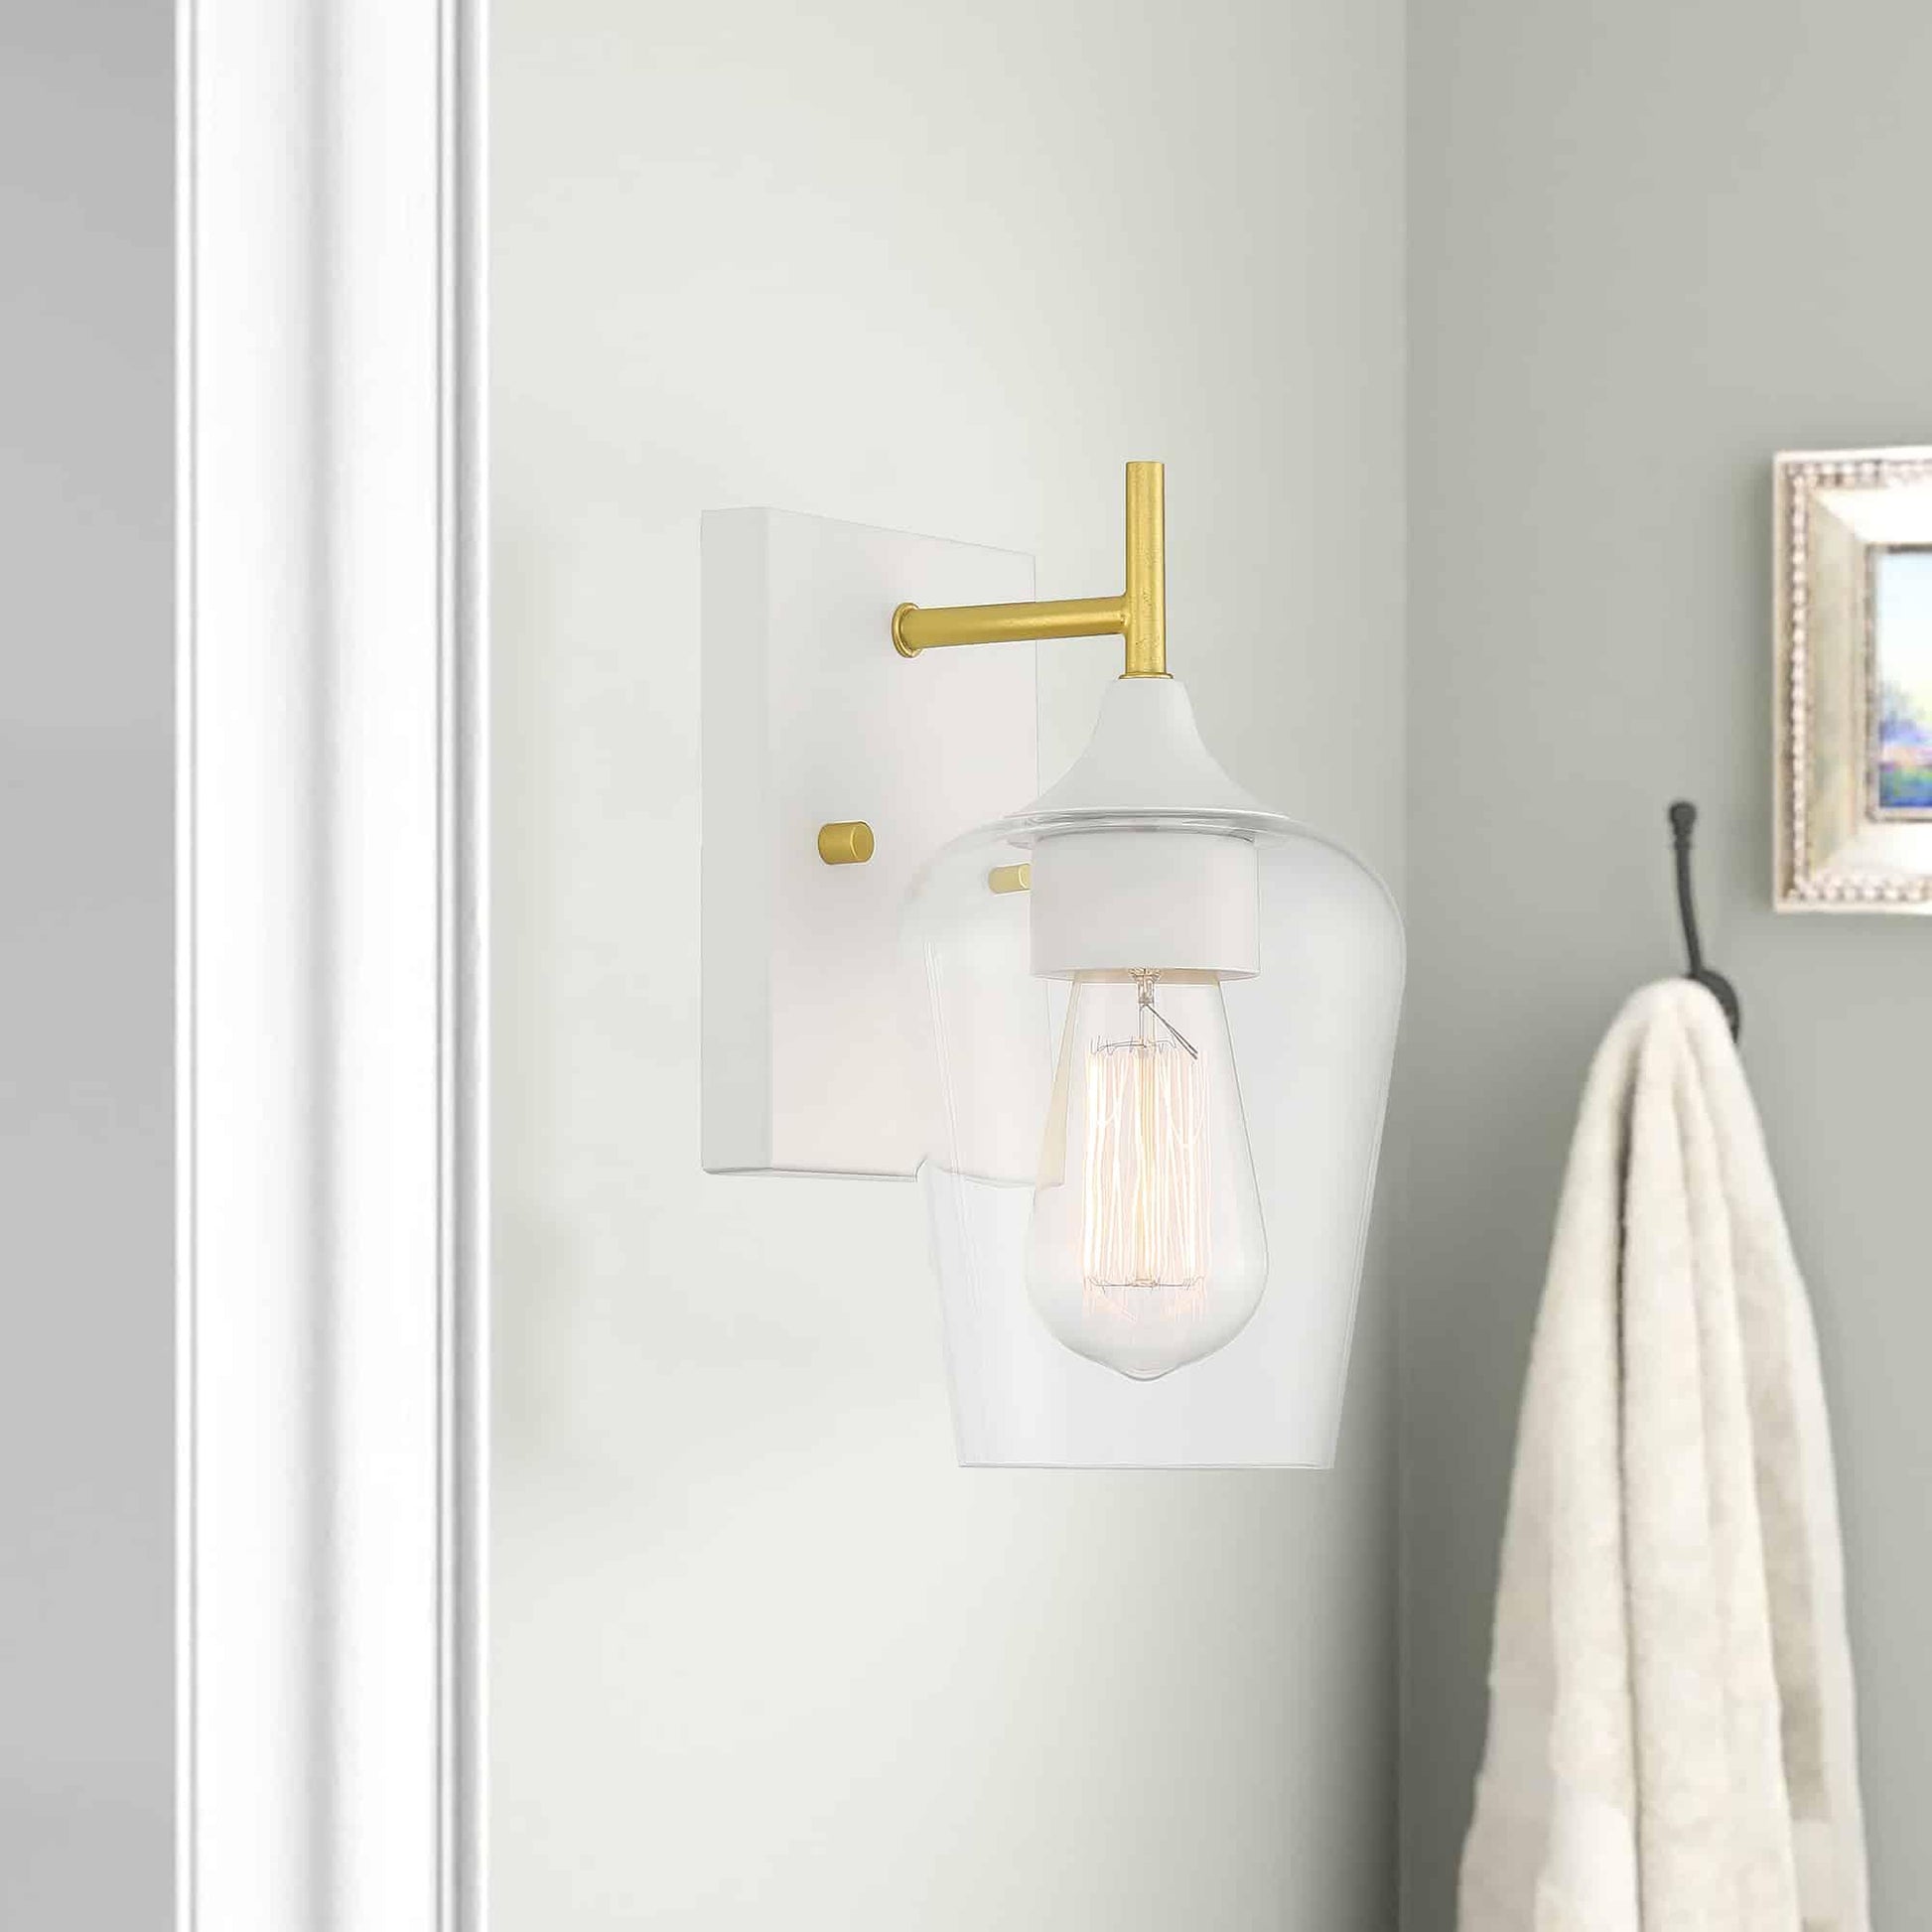 1 light glass wall sconce set of 2 (50) by ACROMA